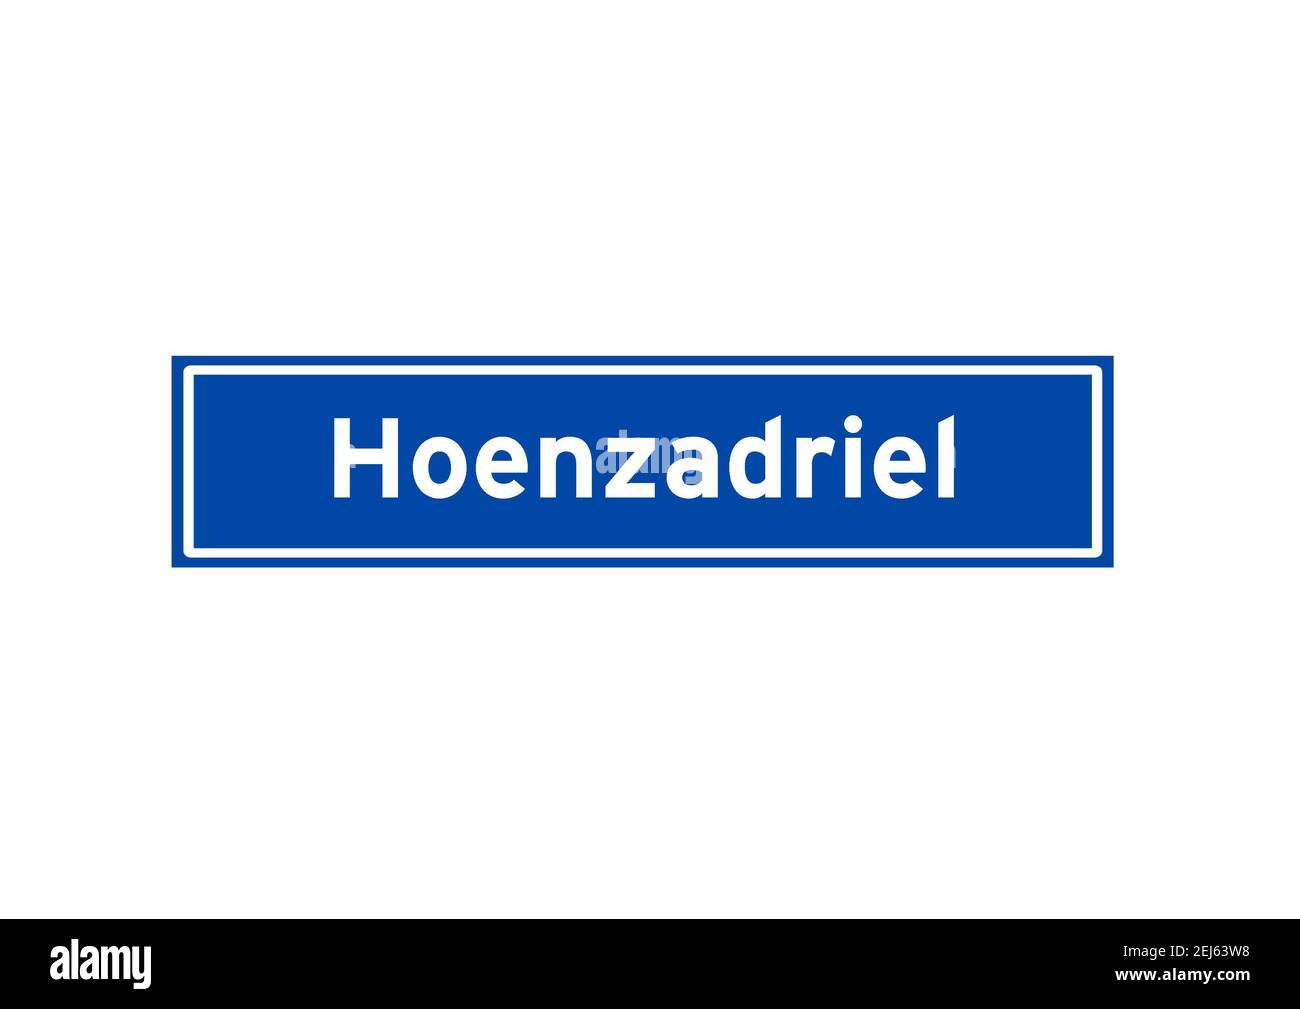 Hoenzadriel isolated Dutch place name sign. City sign from the Netherlands. Stock Photo